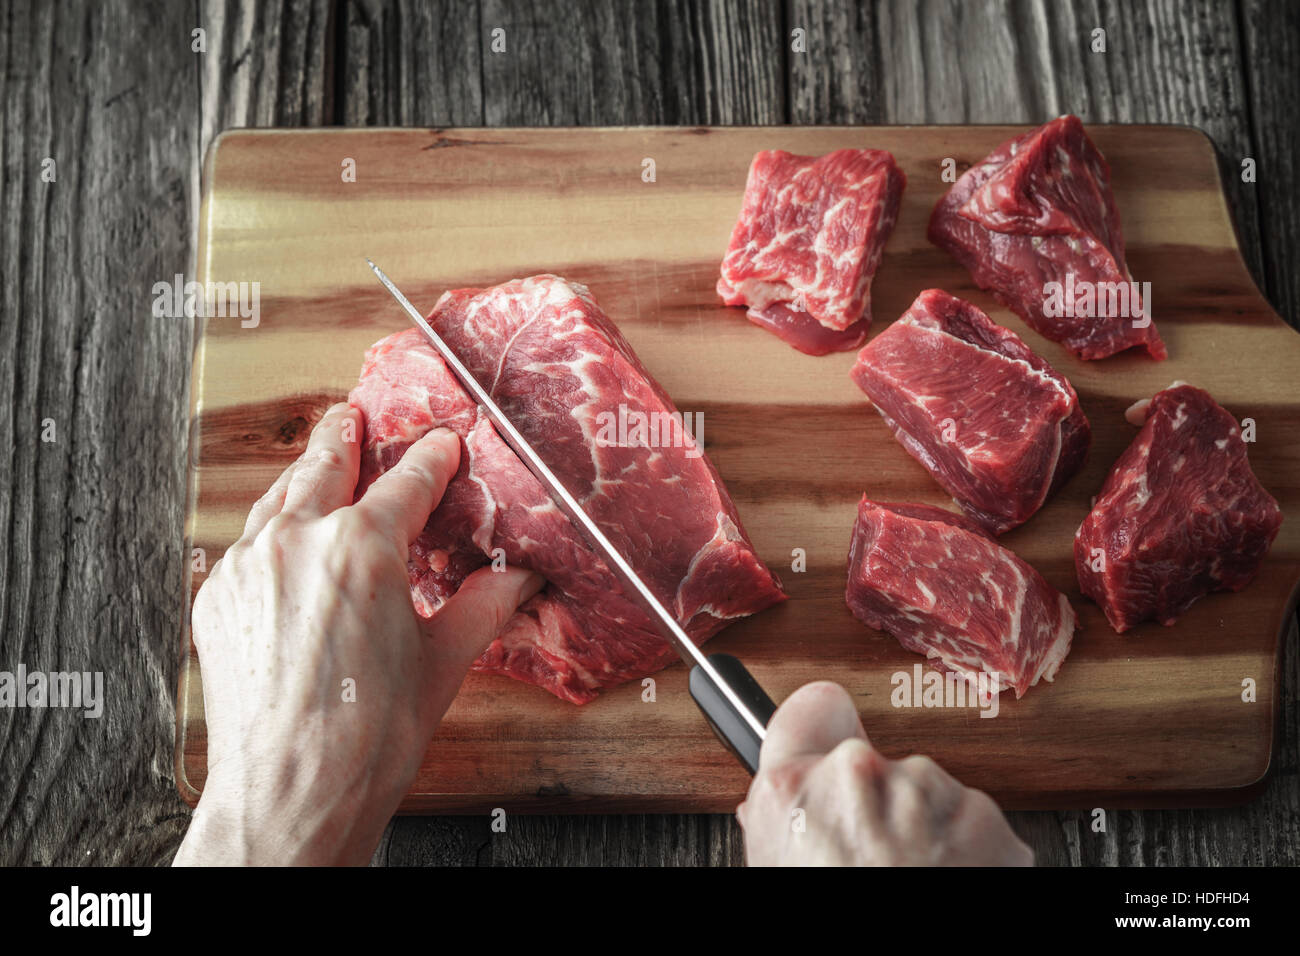 Cutting angus beef on the wooden table horizontal Stock Photo